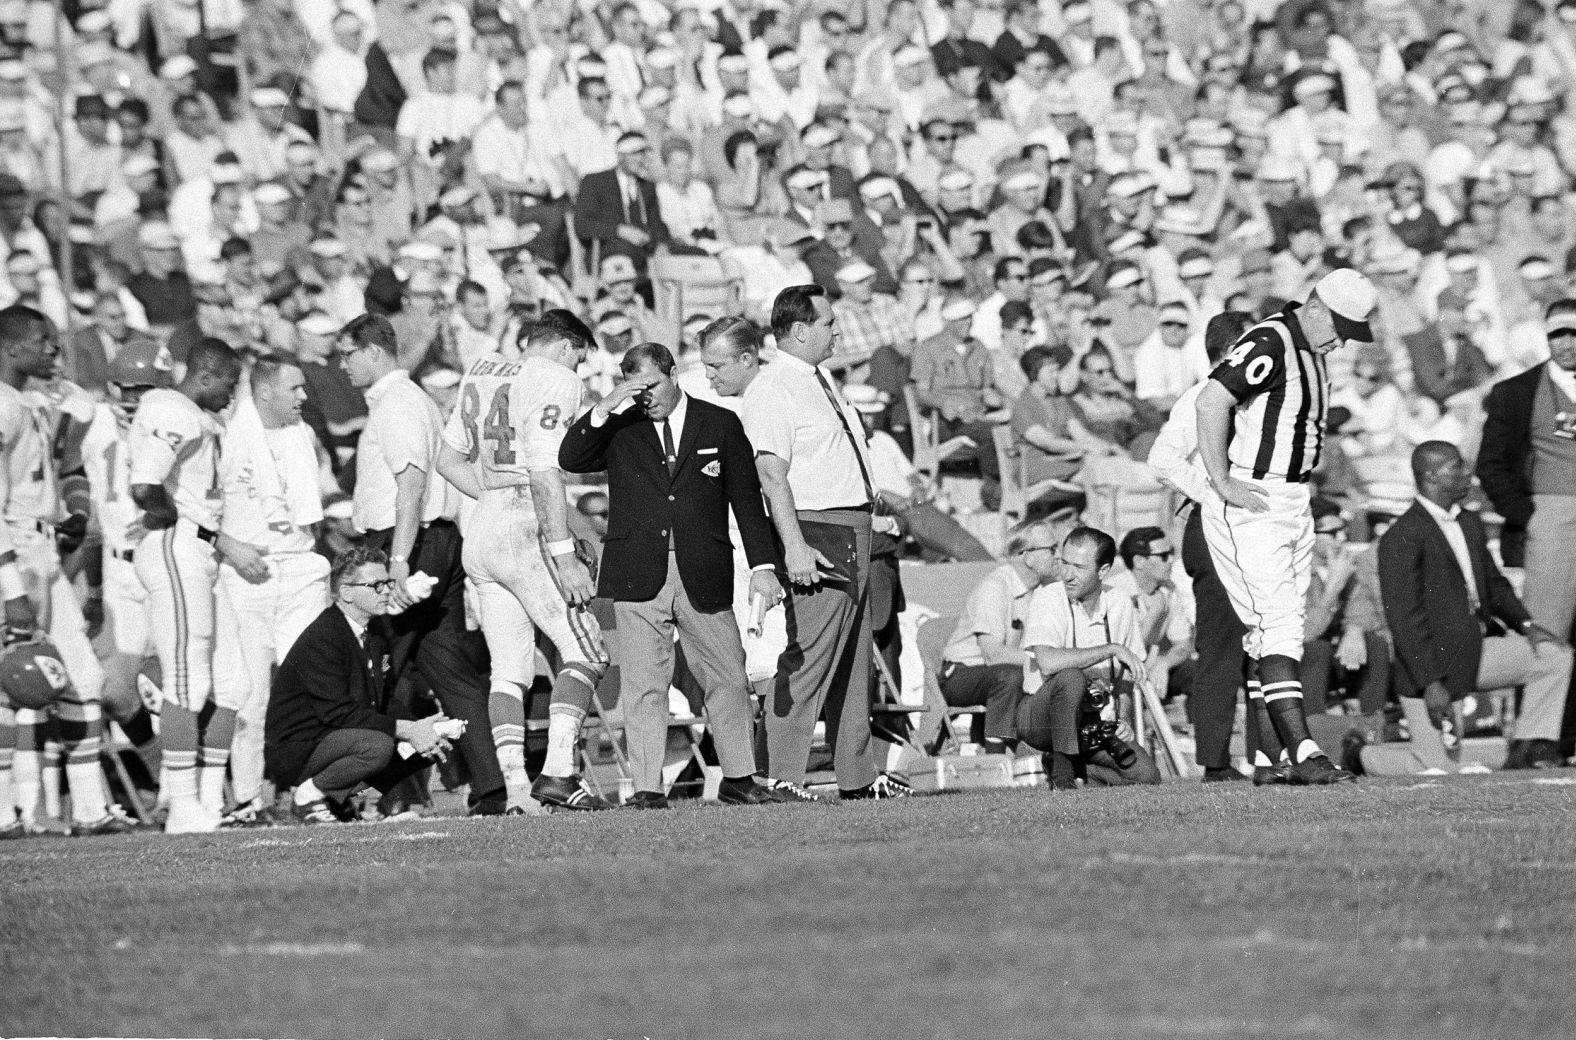 Chiefs head coach Hank Stram covers his face on the sideline. While this game did not go in his favor, he would be back three years later to win Super Bowl IV.